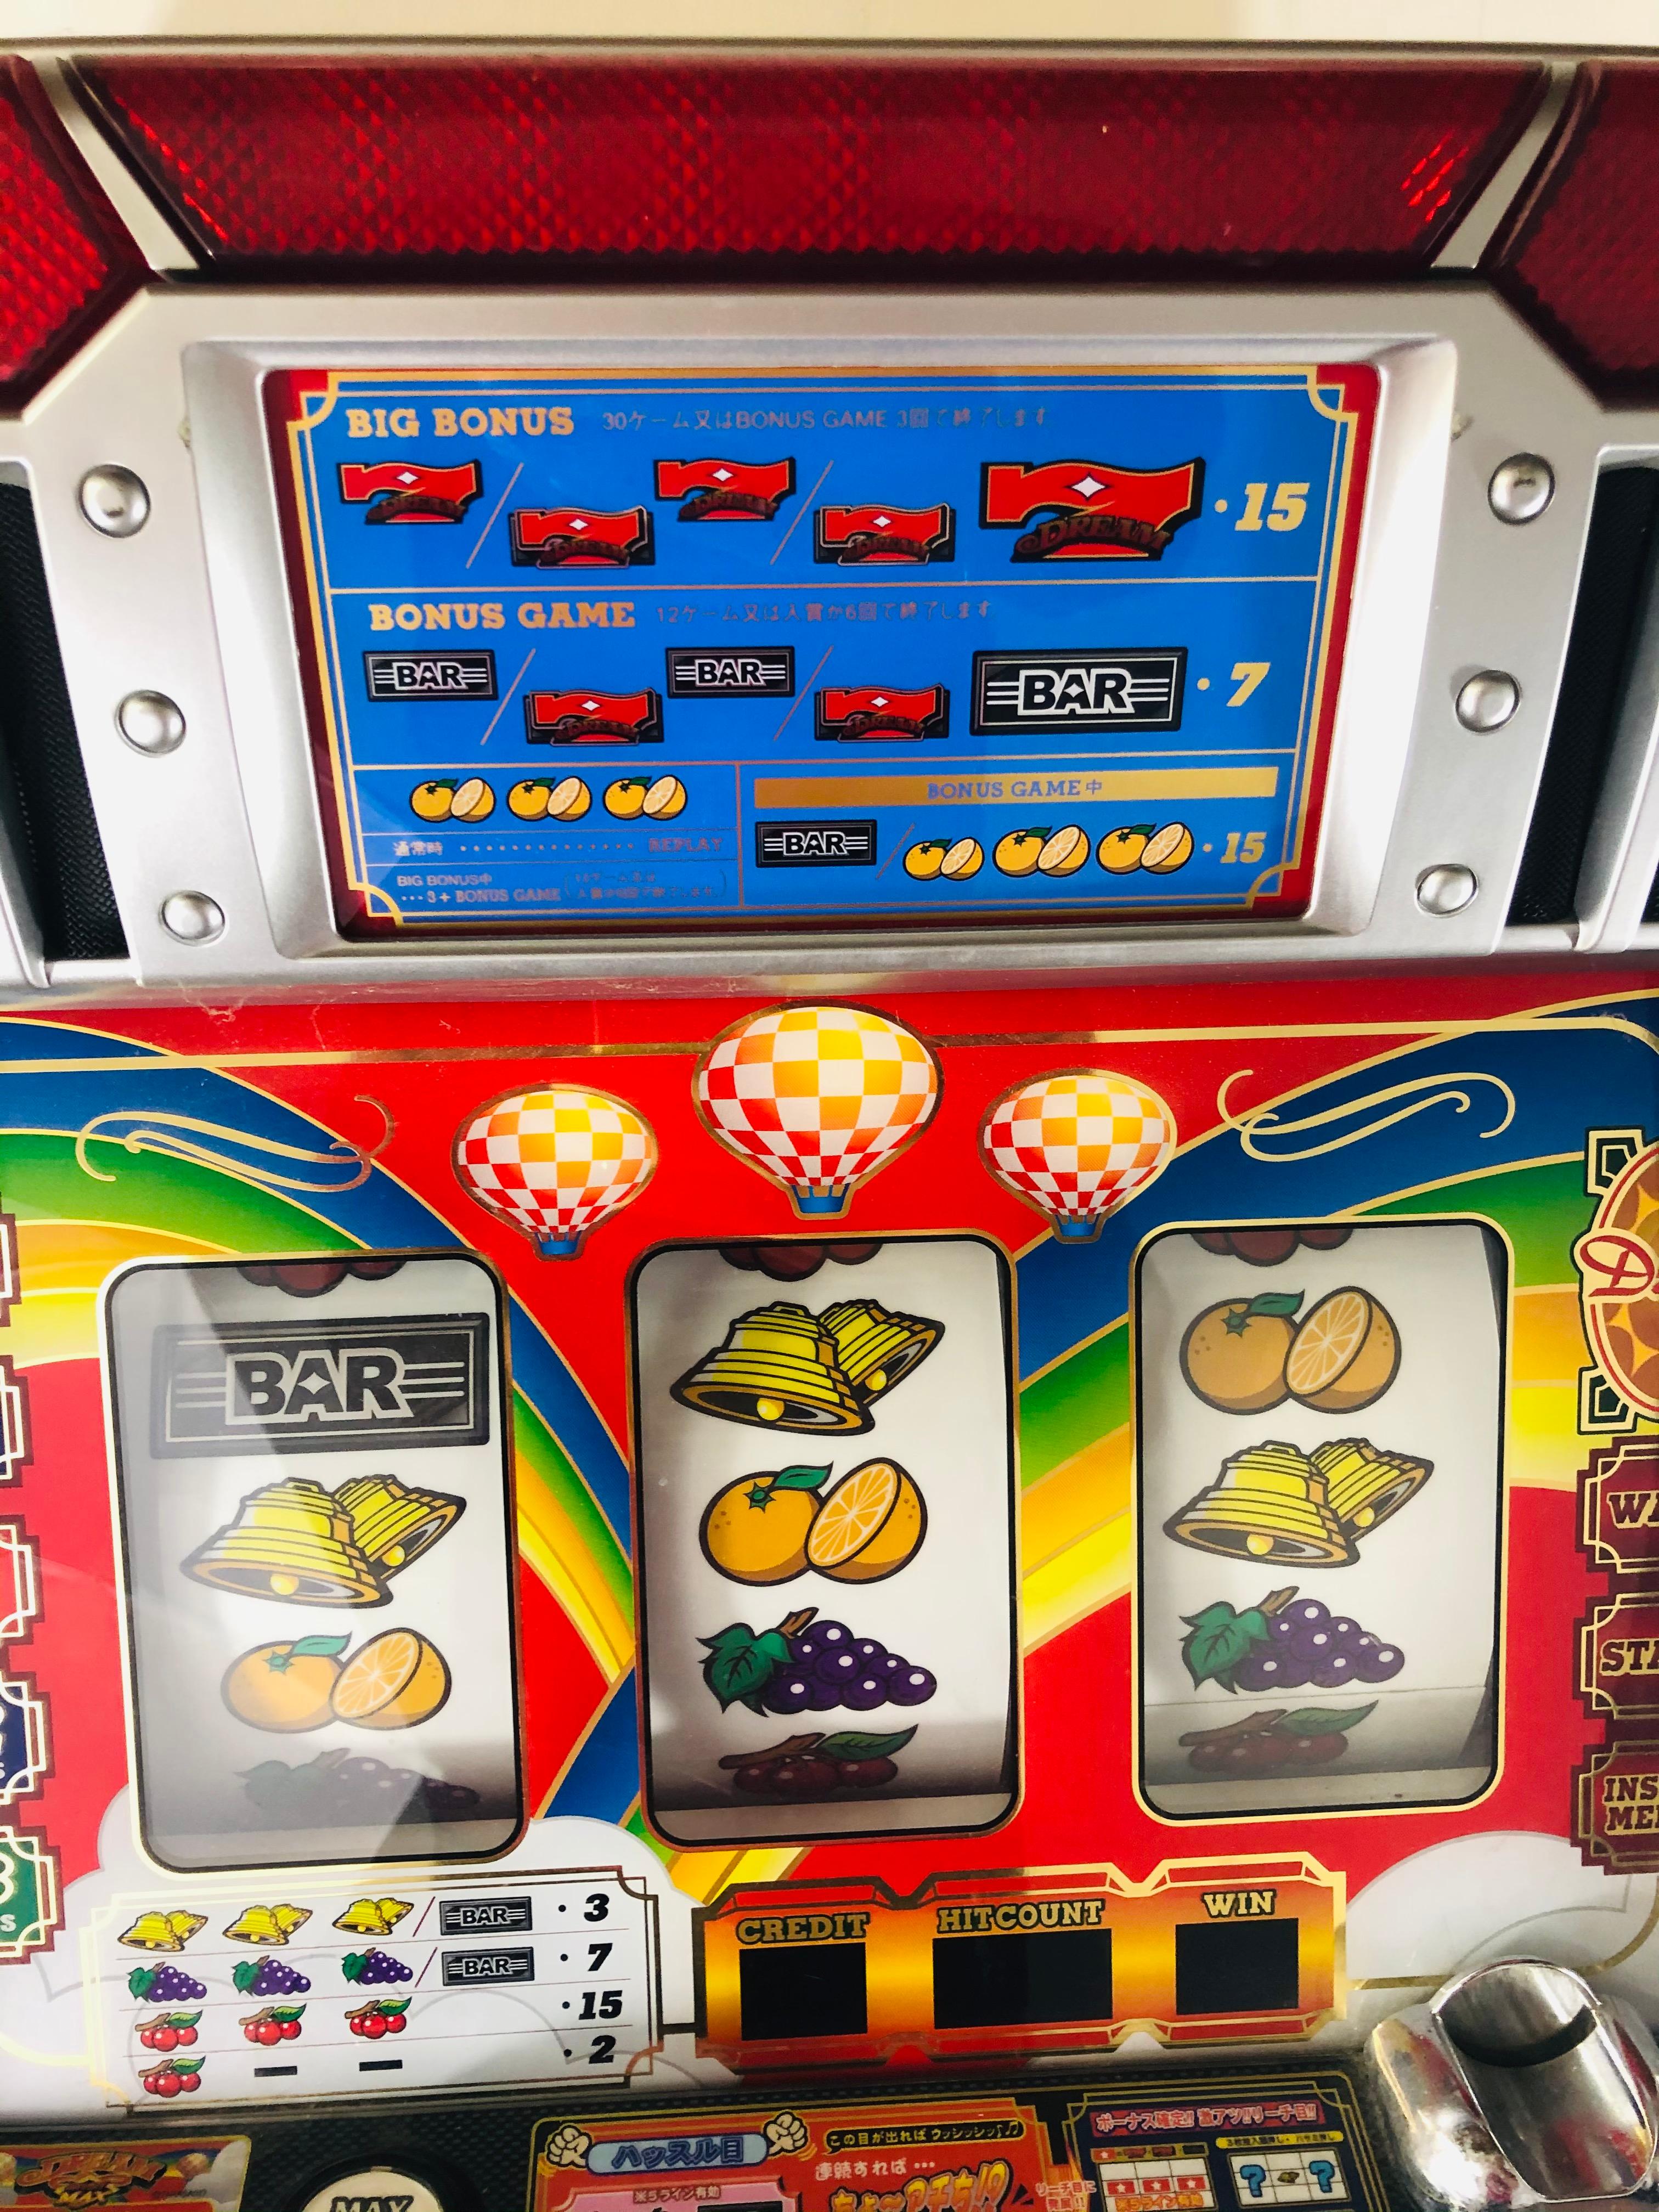 A vintage retro old-school slot machine by the Japanese maker Takasago, dream model. The slot machine comes with tokens. It is a great decoration and entertainment object in adult playroom or cigar room. Also wonderful decorative piece to complete